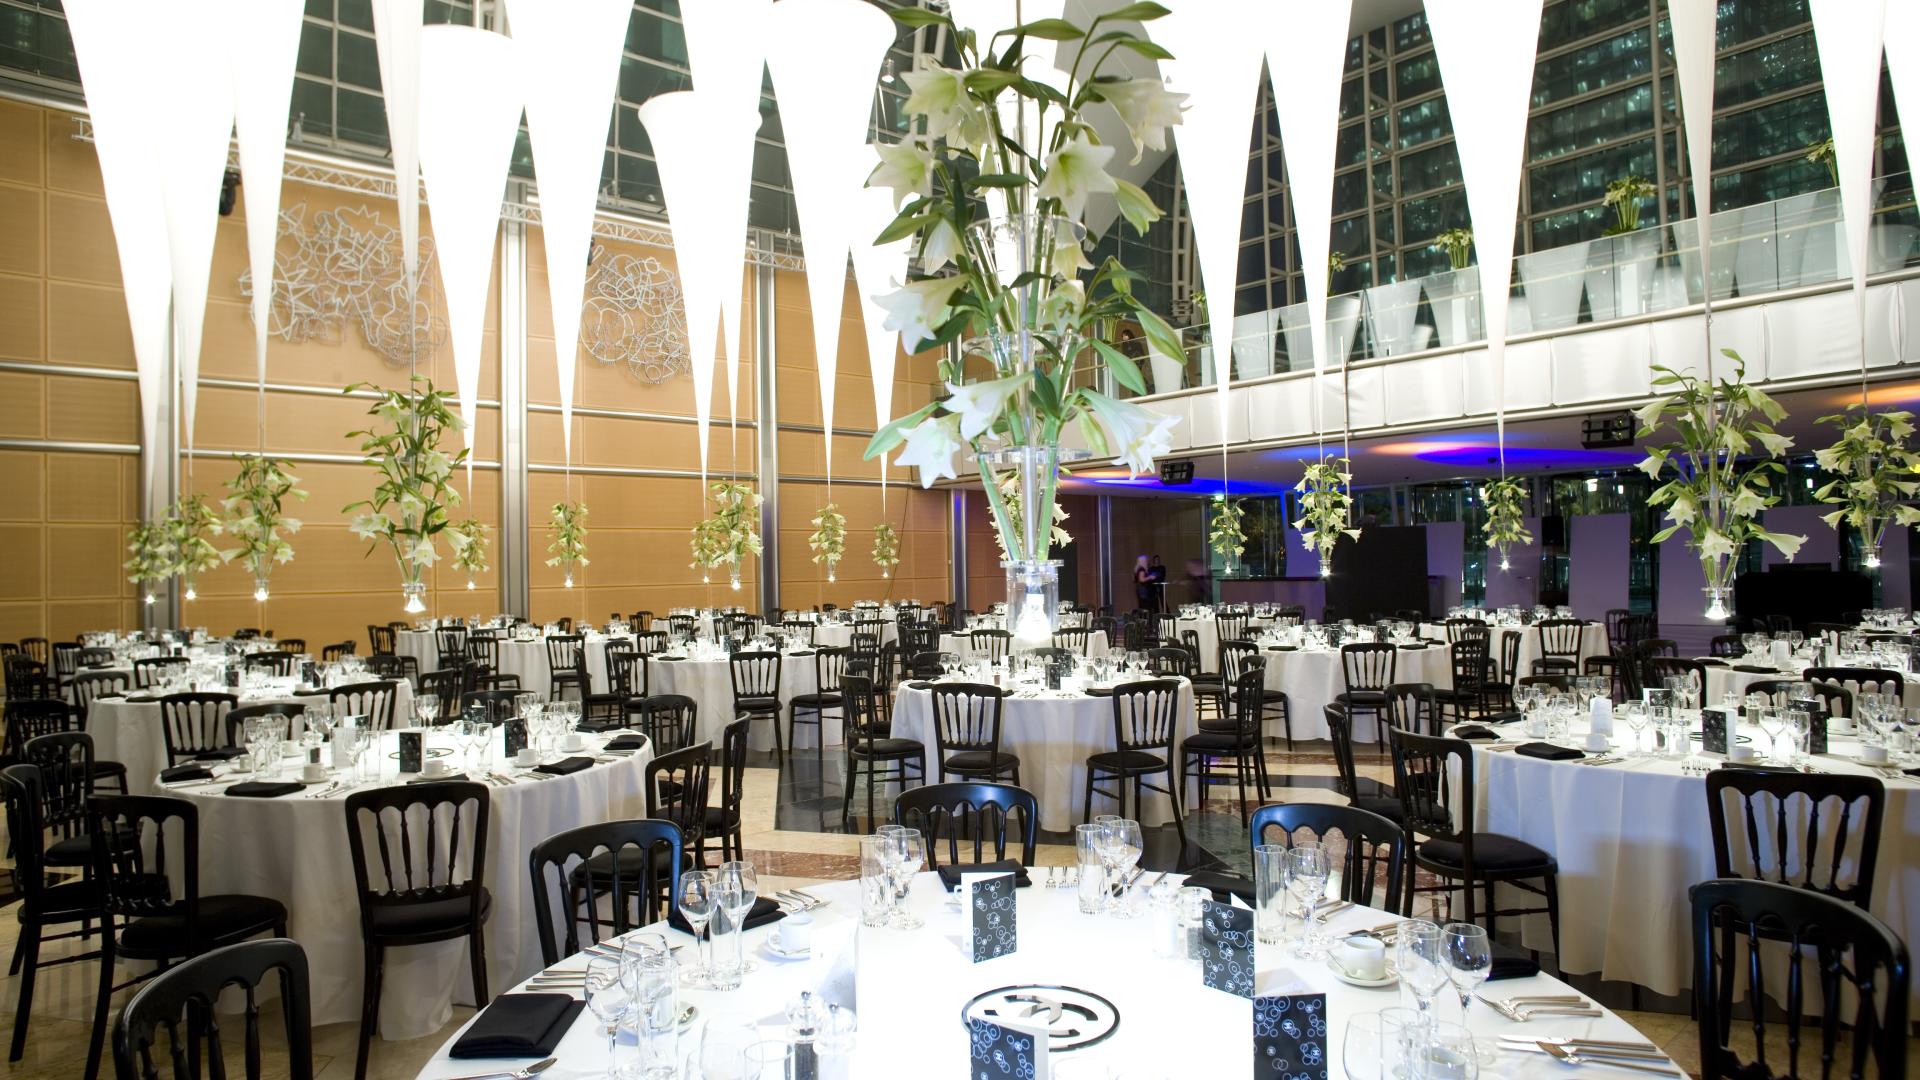 Function Rooms for Hire in South London